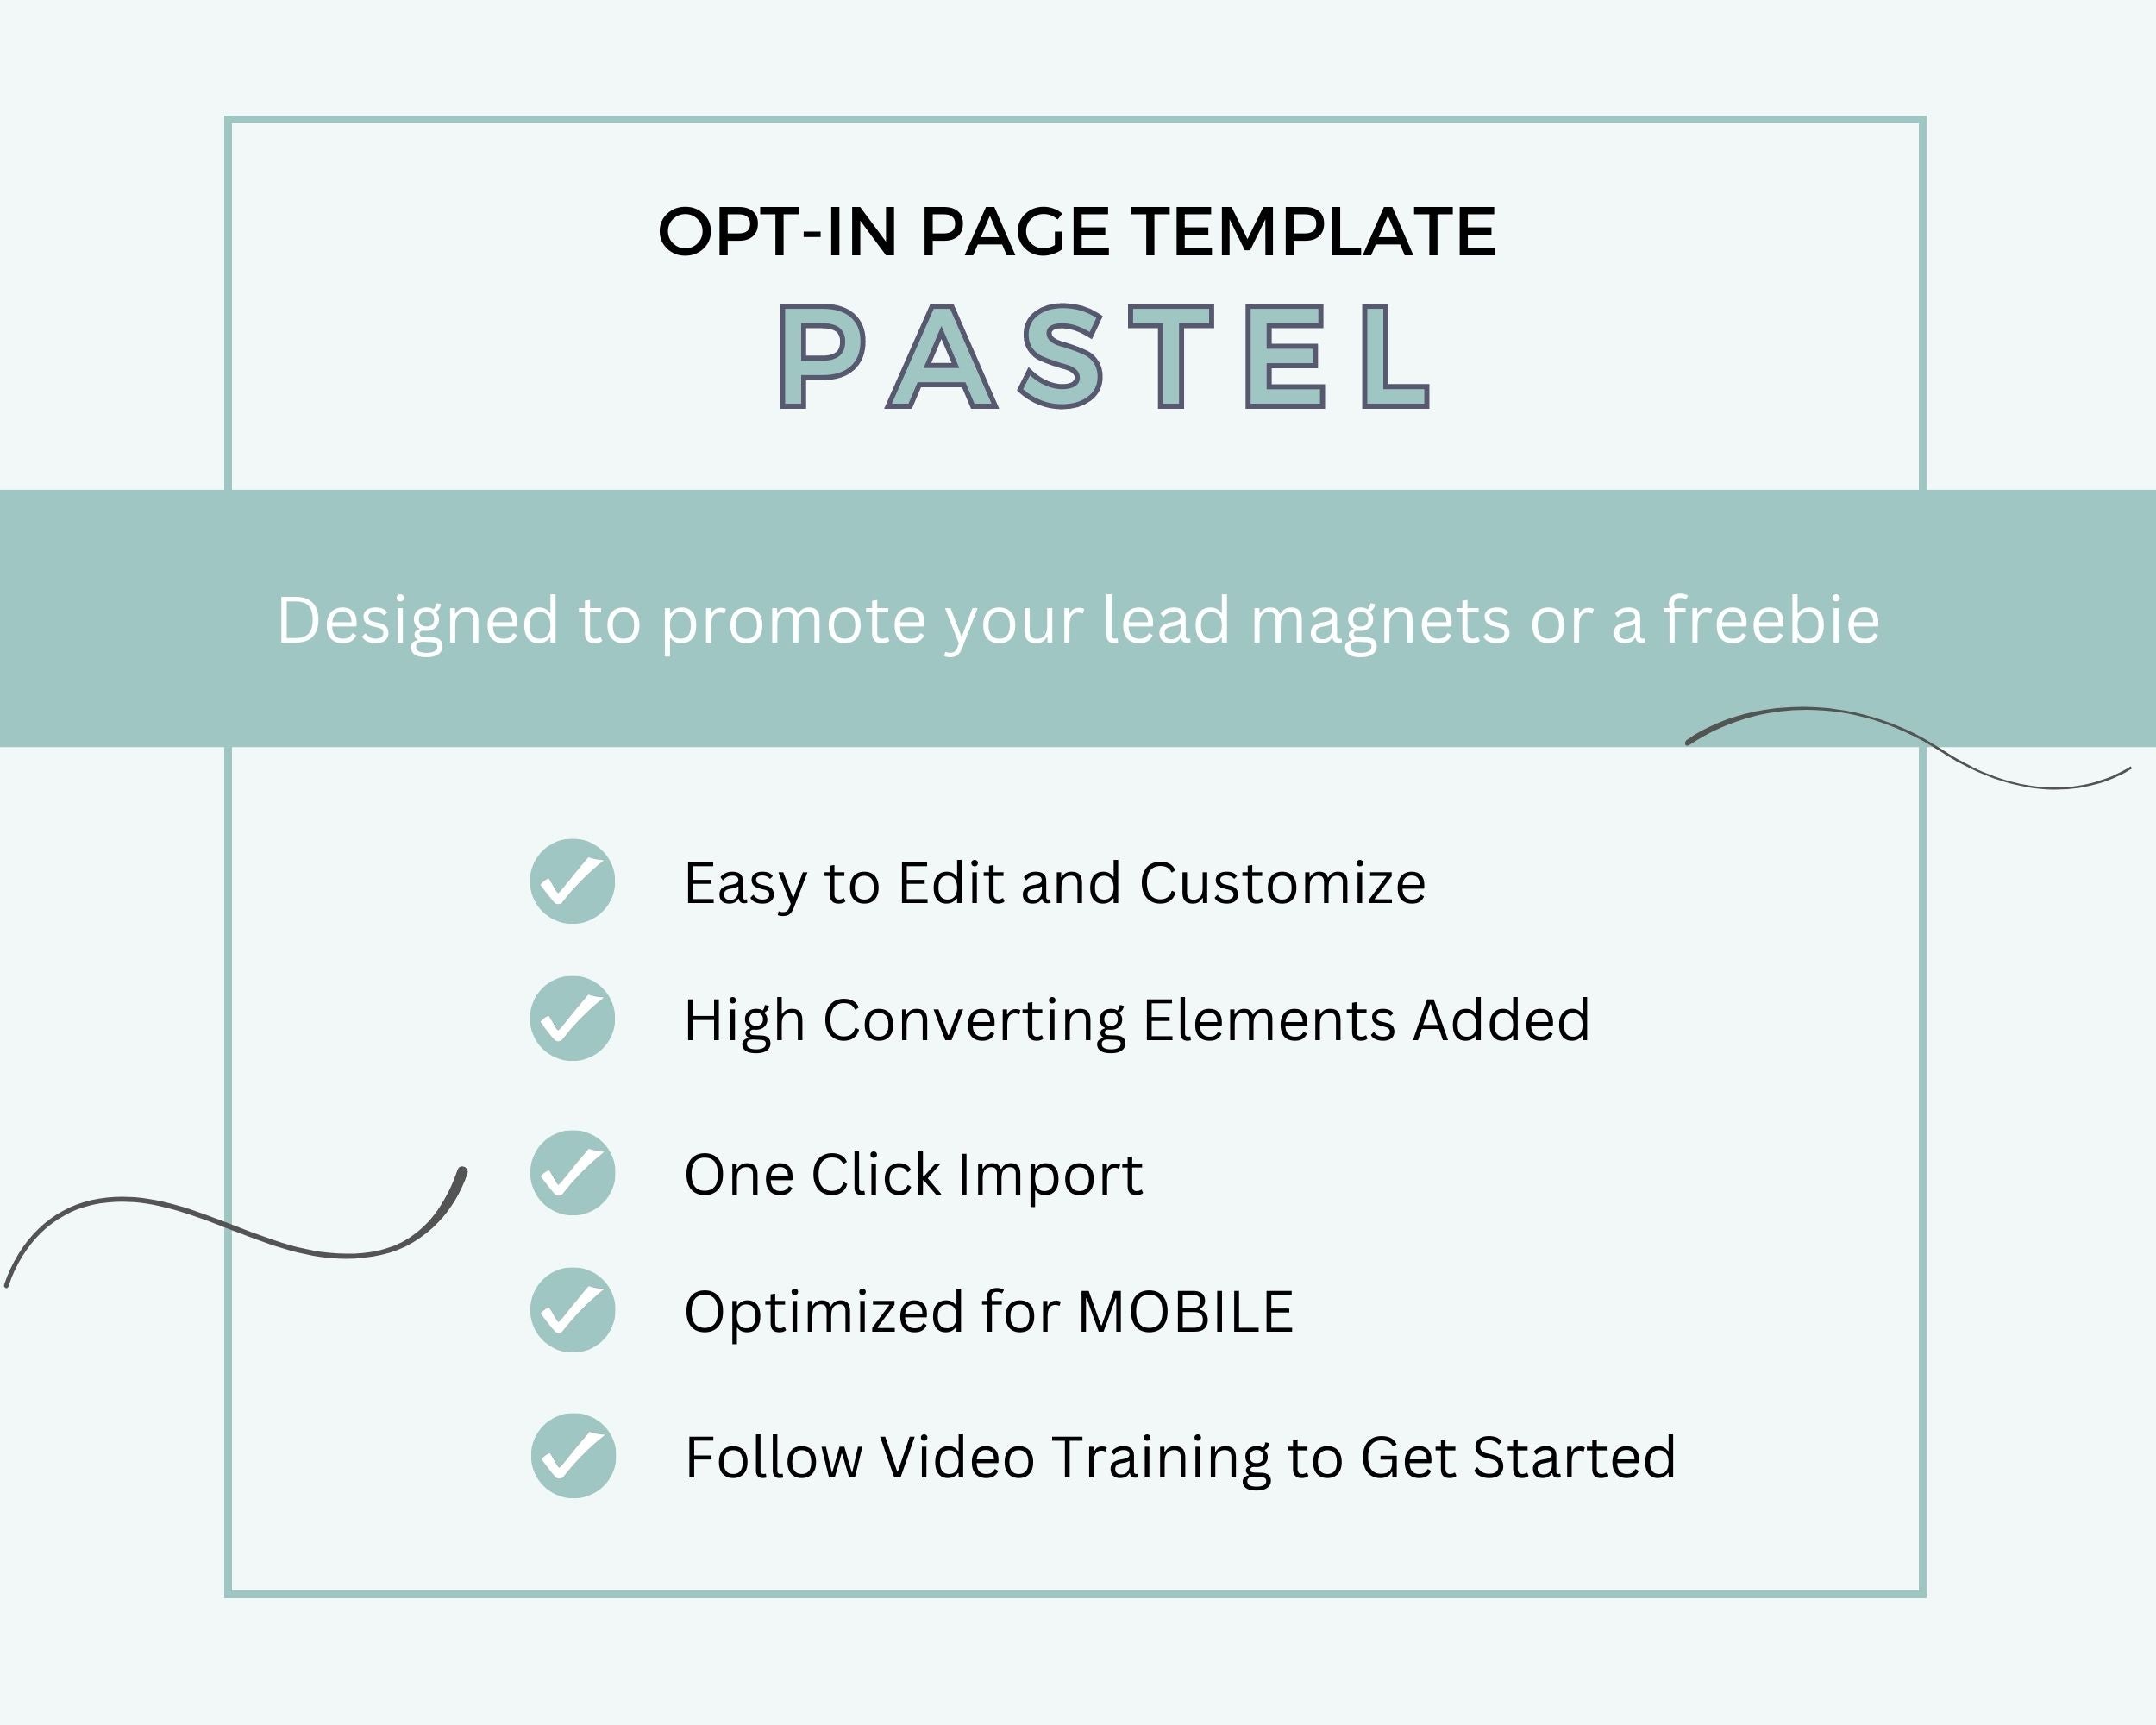 Pastel ThriveCart Opt-In Page Template